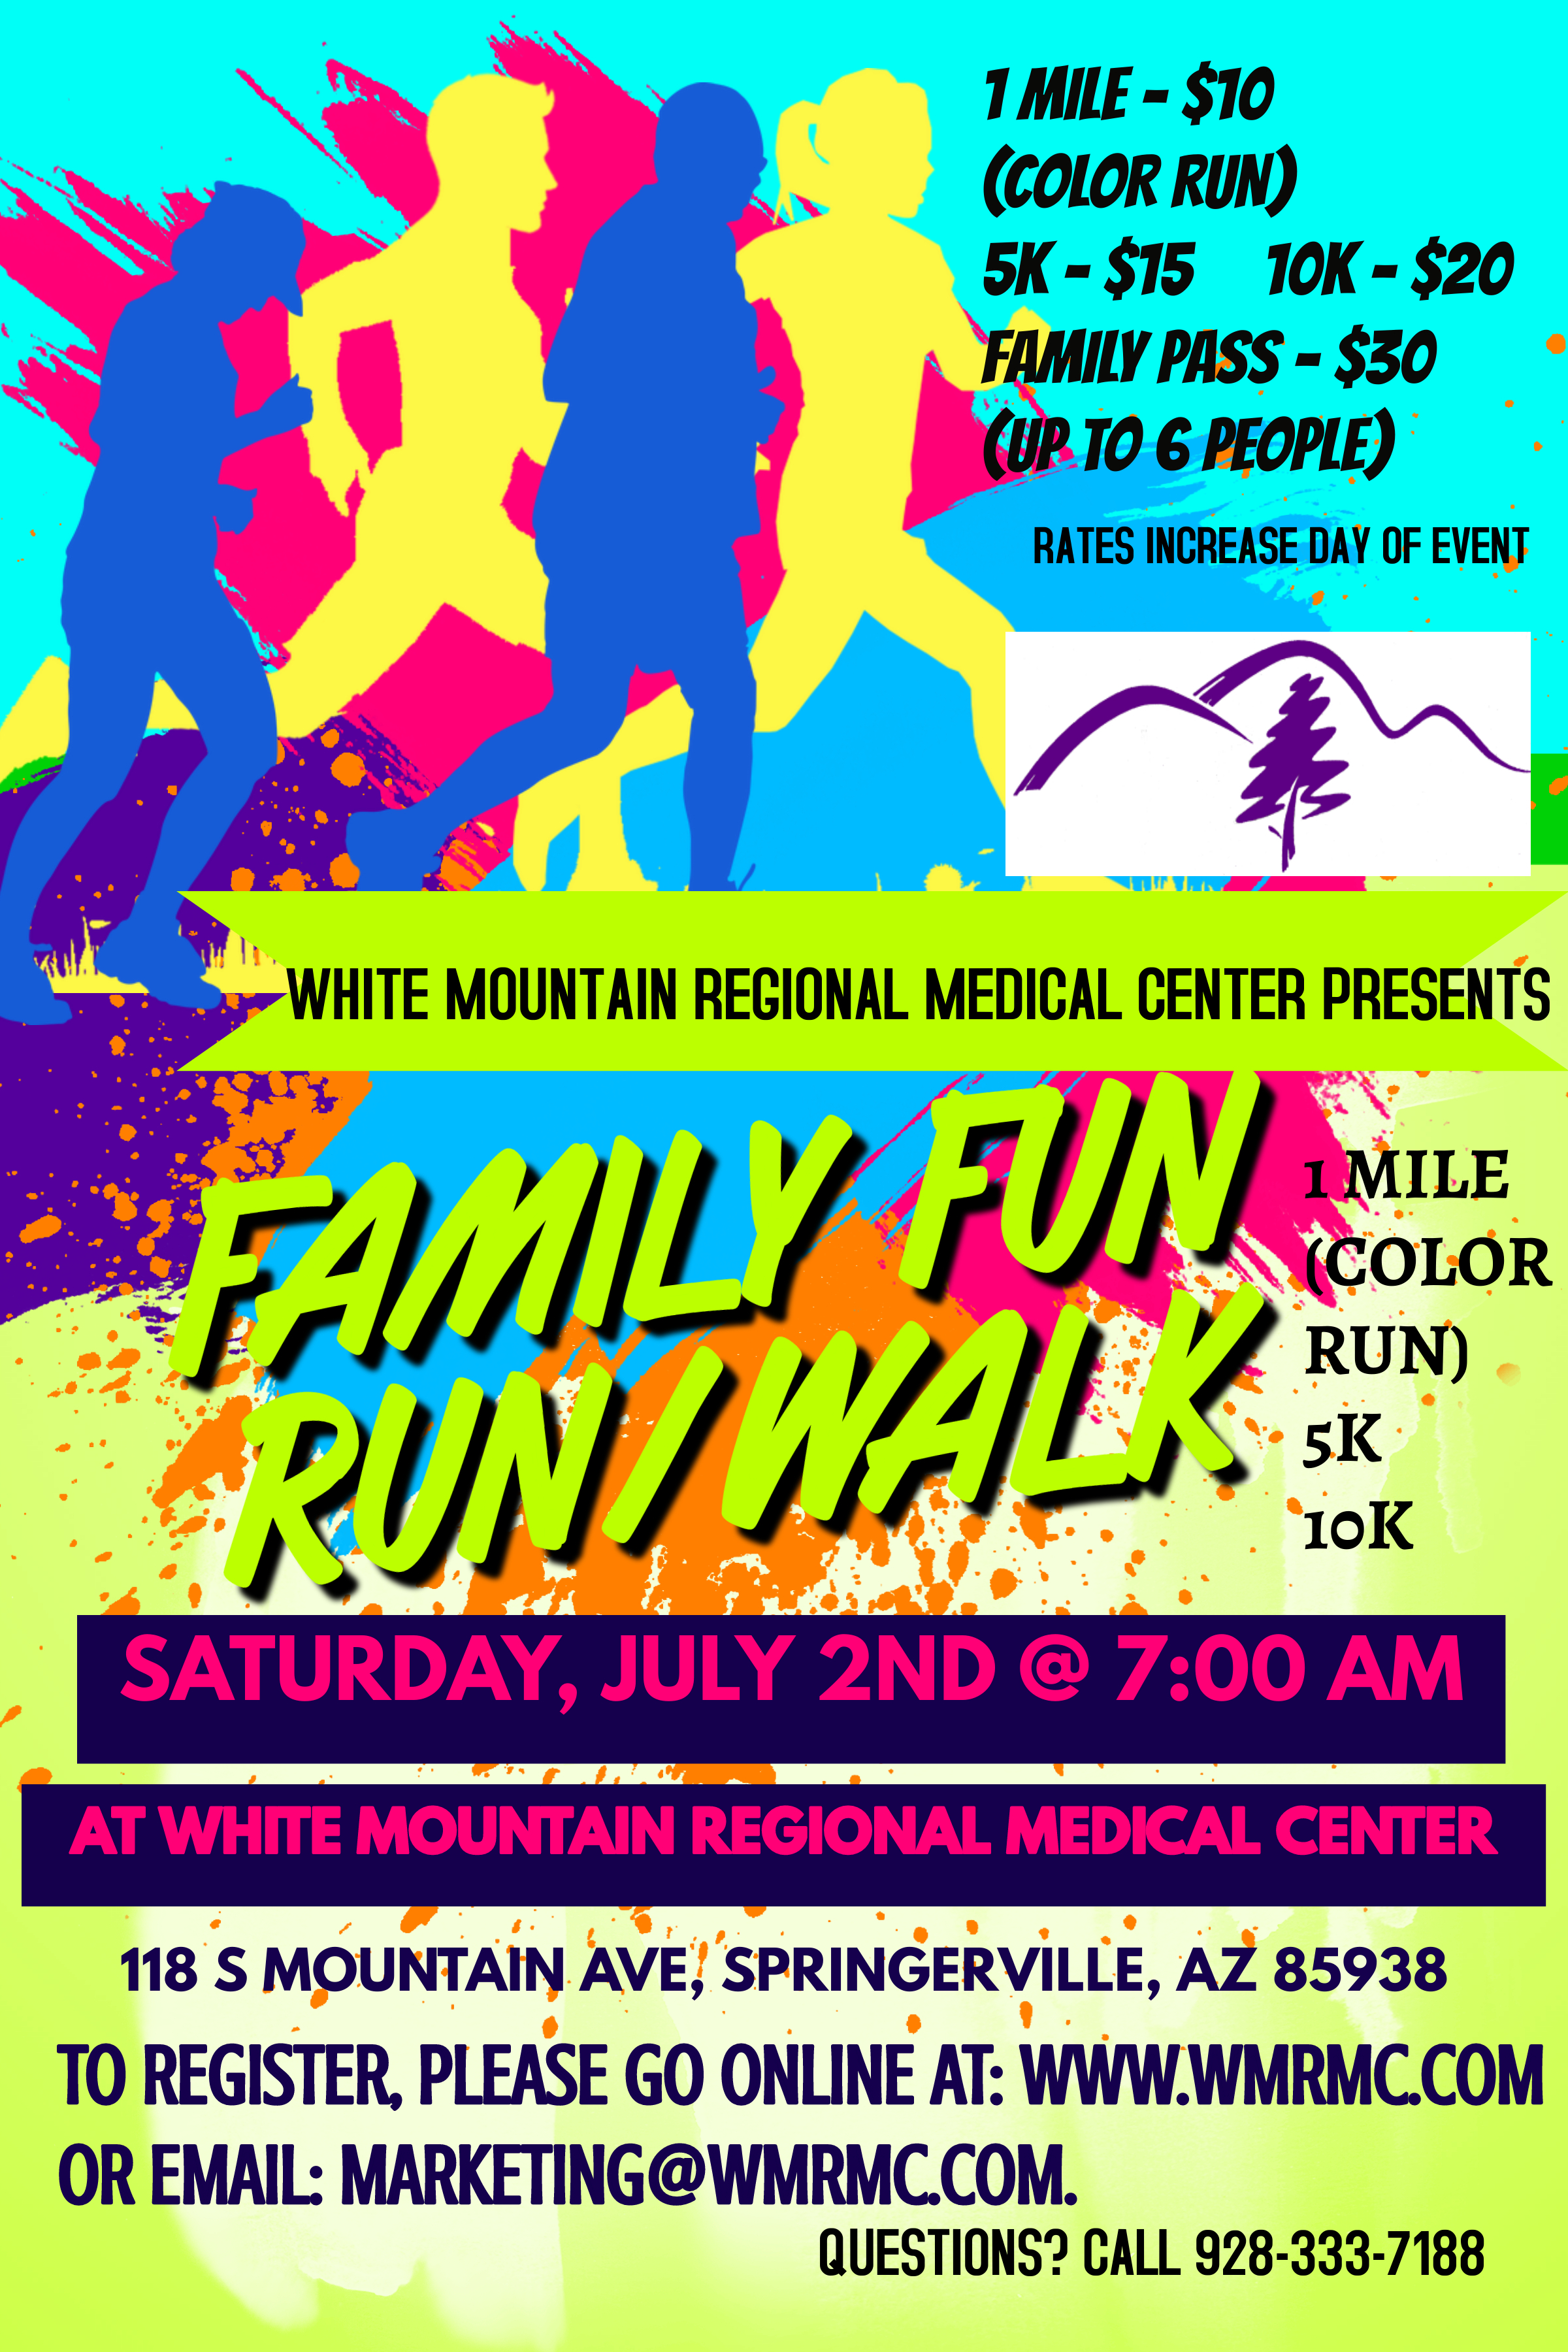 Banner Graphic of outlined silhouettes of four people jogging. There is two males and two females. Banner says:

1 mile- $10
(COLOR RUN)
5k- $15
10k-$20
FAMILY PASS- $30
(UP TO 6 PEOPLE)
Rates increase day of event
White Mountain Regional Medical Center PresentsFAMILY FUN/ 
RUN/WALK
1 MILE (COLOR RUN) 5K 10K
SATURDAY, JULY 2, 2022 @ 7:00 AM
AT WHITE MOUNTAIN REGIONAL MEDICAL CENTER

118 S MOUNTAIN AVE, SPRINGERVILLE, AZ 85938
TO REGISTER, PLEASE GO ONLINE AT: WW.WMRMC.COM OR EMAIL: MARKETING@WMRMC.COM

QUESTIONS? CALL 9283337188